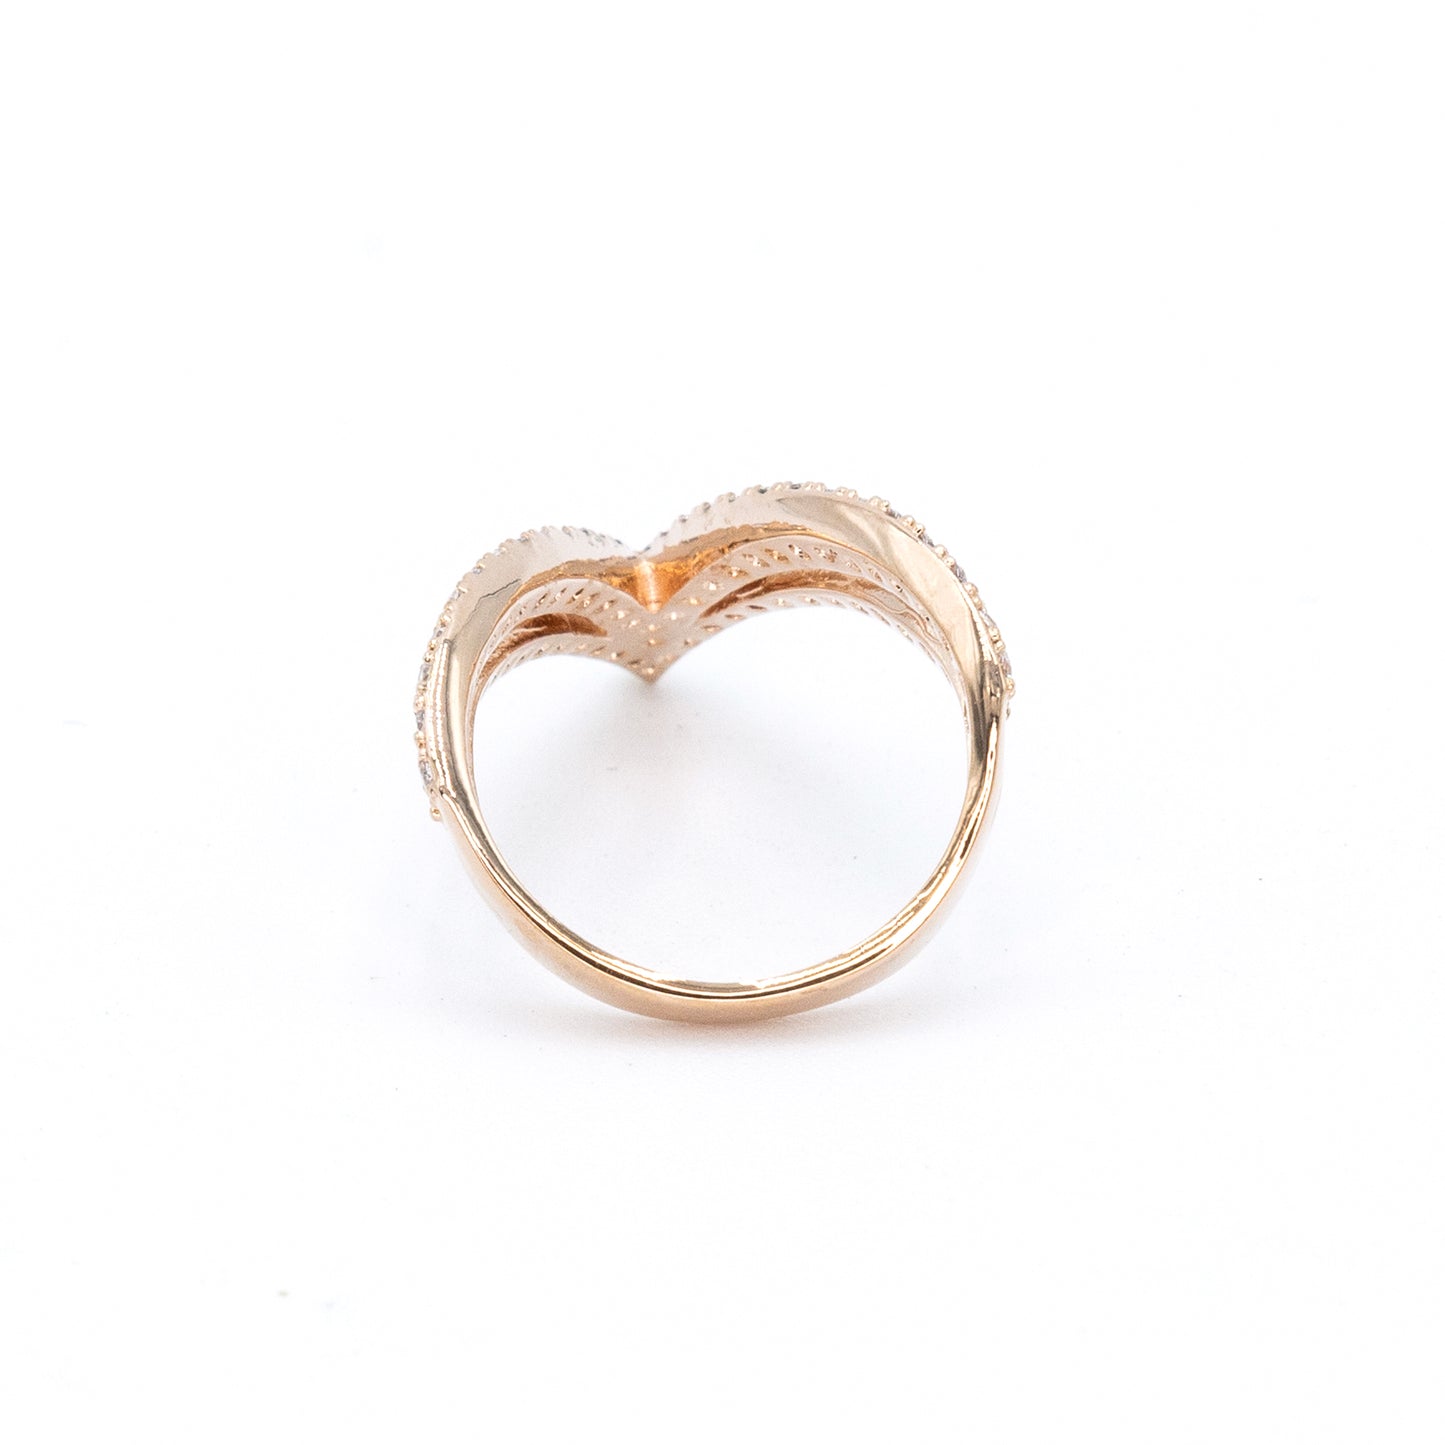 The Pave V Ring in Rose Gold